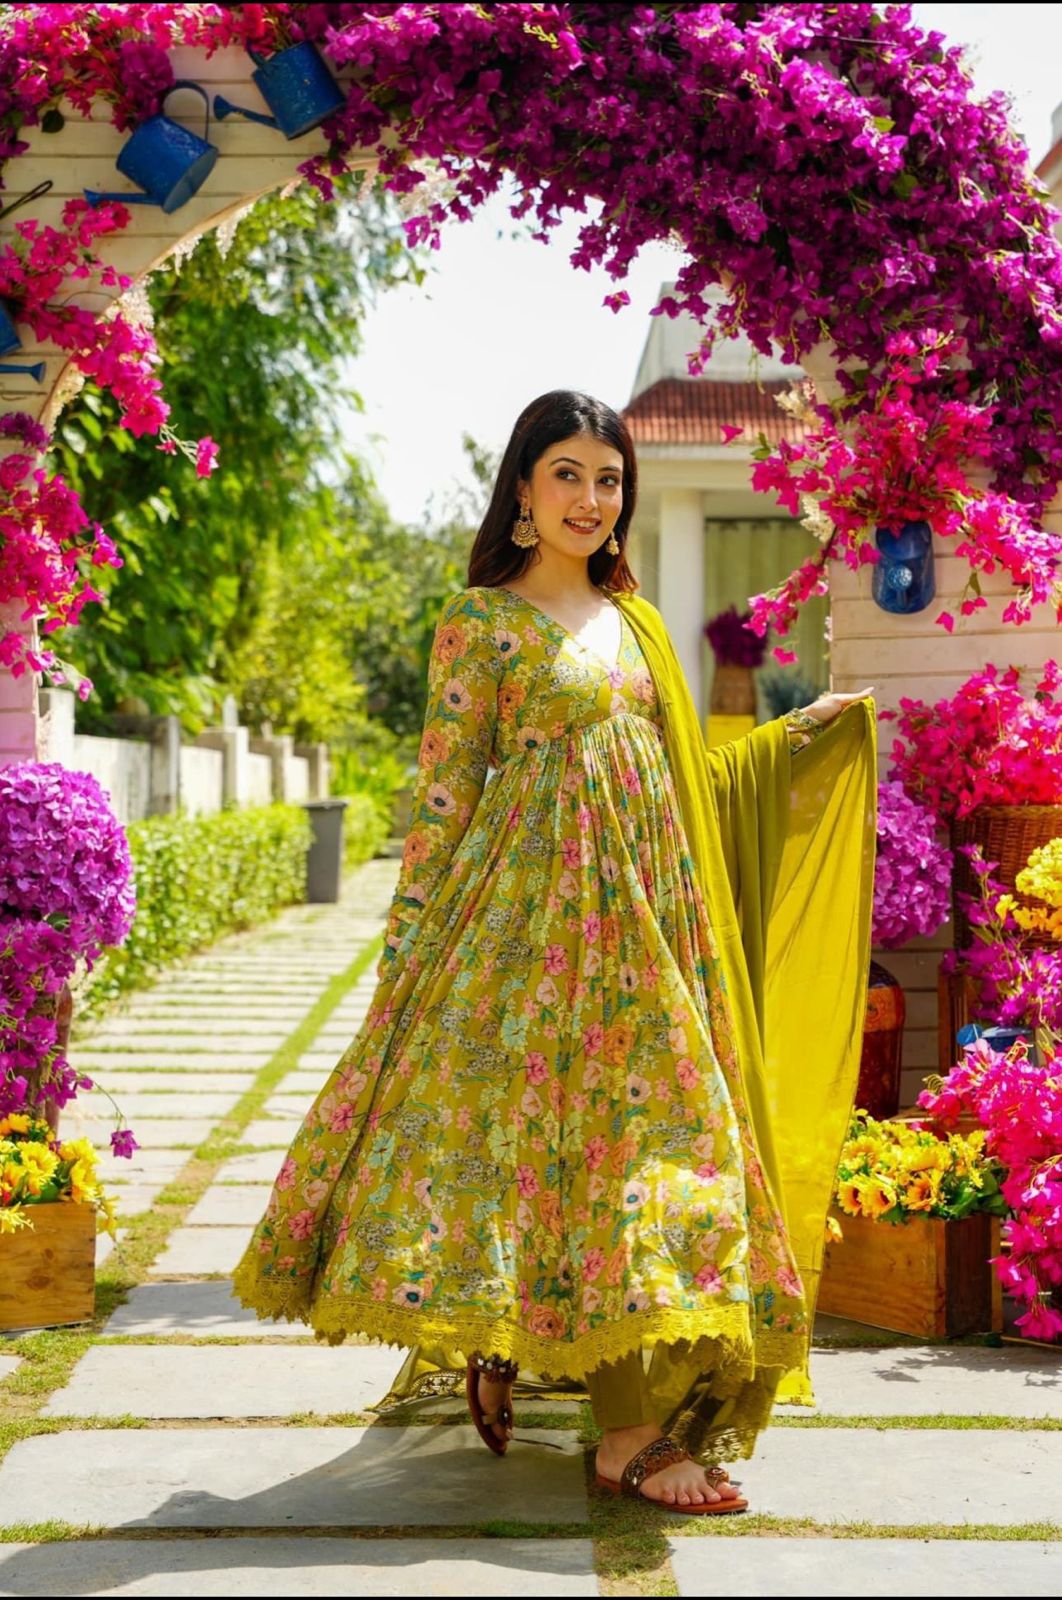 INTRODUCING A GEORGETTE ANARKALI DRESS WITH PRINTED DESIGN